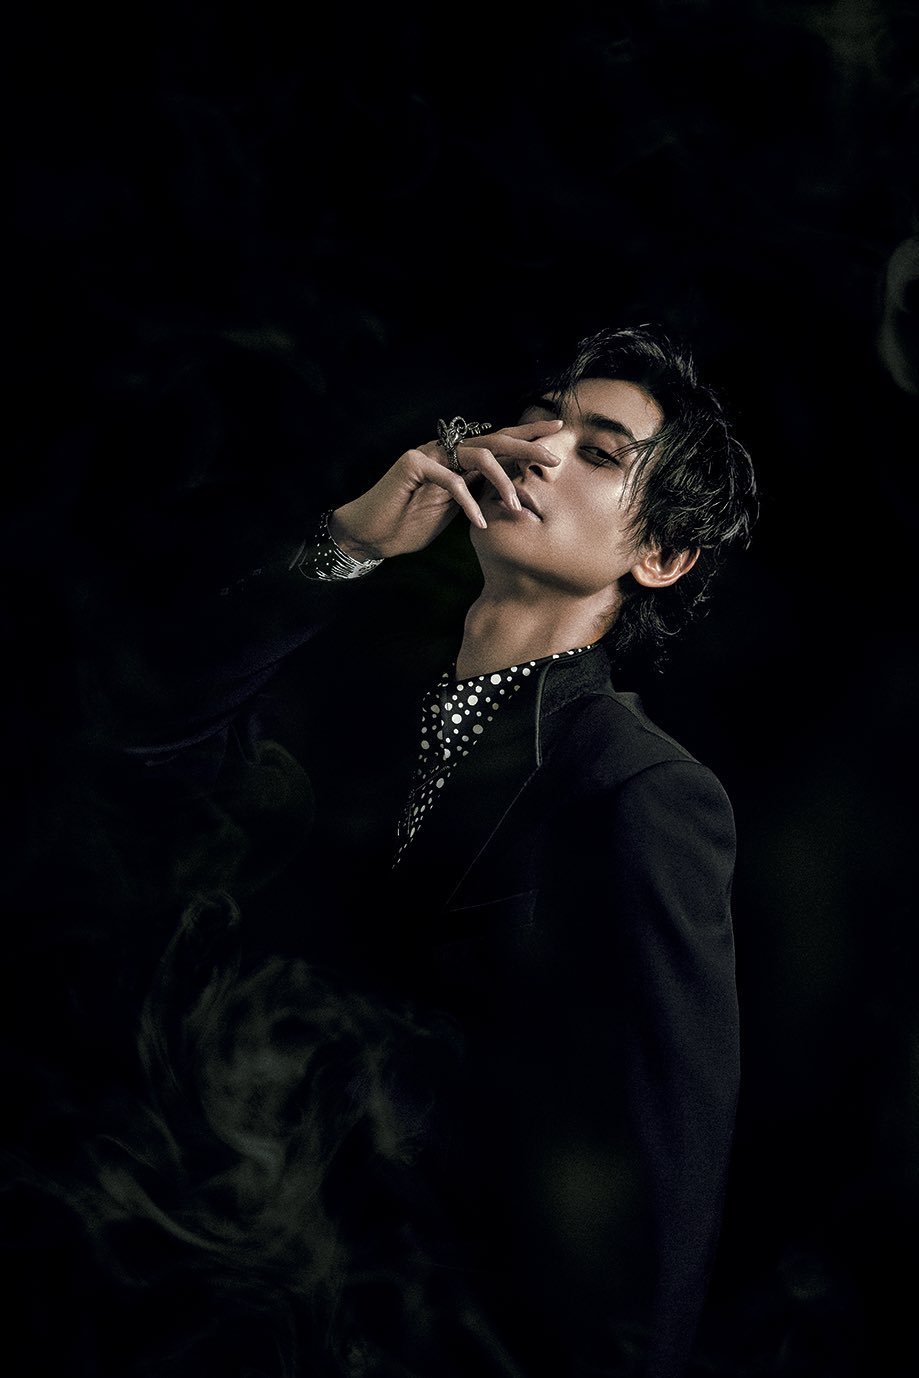 Musical ‘Elisabeth’
As inspired by Death The Black Mode donned by Furukawa Yuta
Photo by Sasaki Shin’ichi (SIGNO)
The actor who is presently bathed in all spotlights of the musical world, Mr. Furukawa Yuta, makes his first entrance at Soen!
Mr....